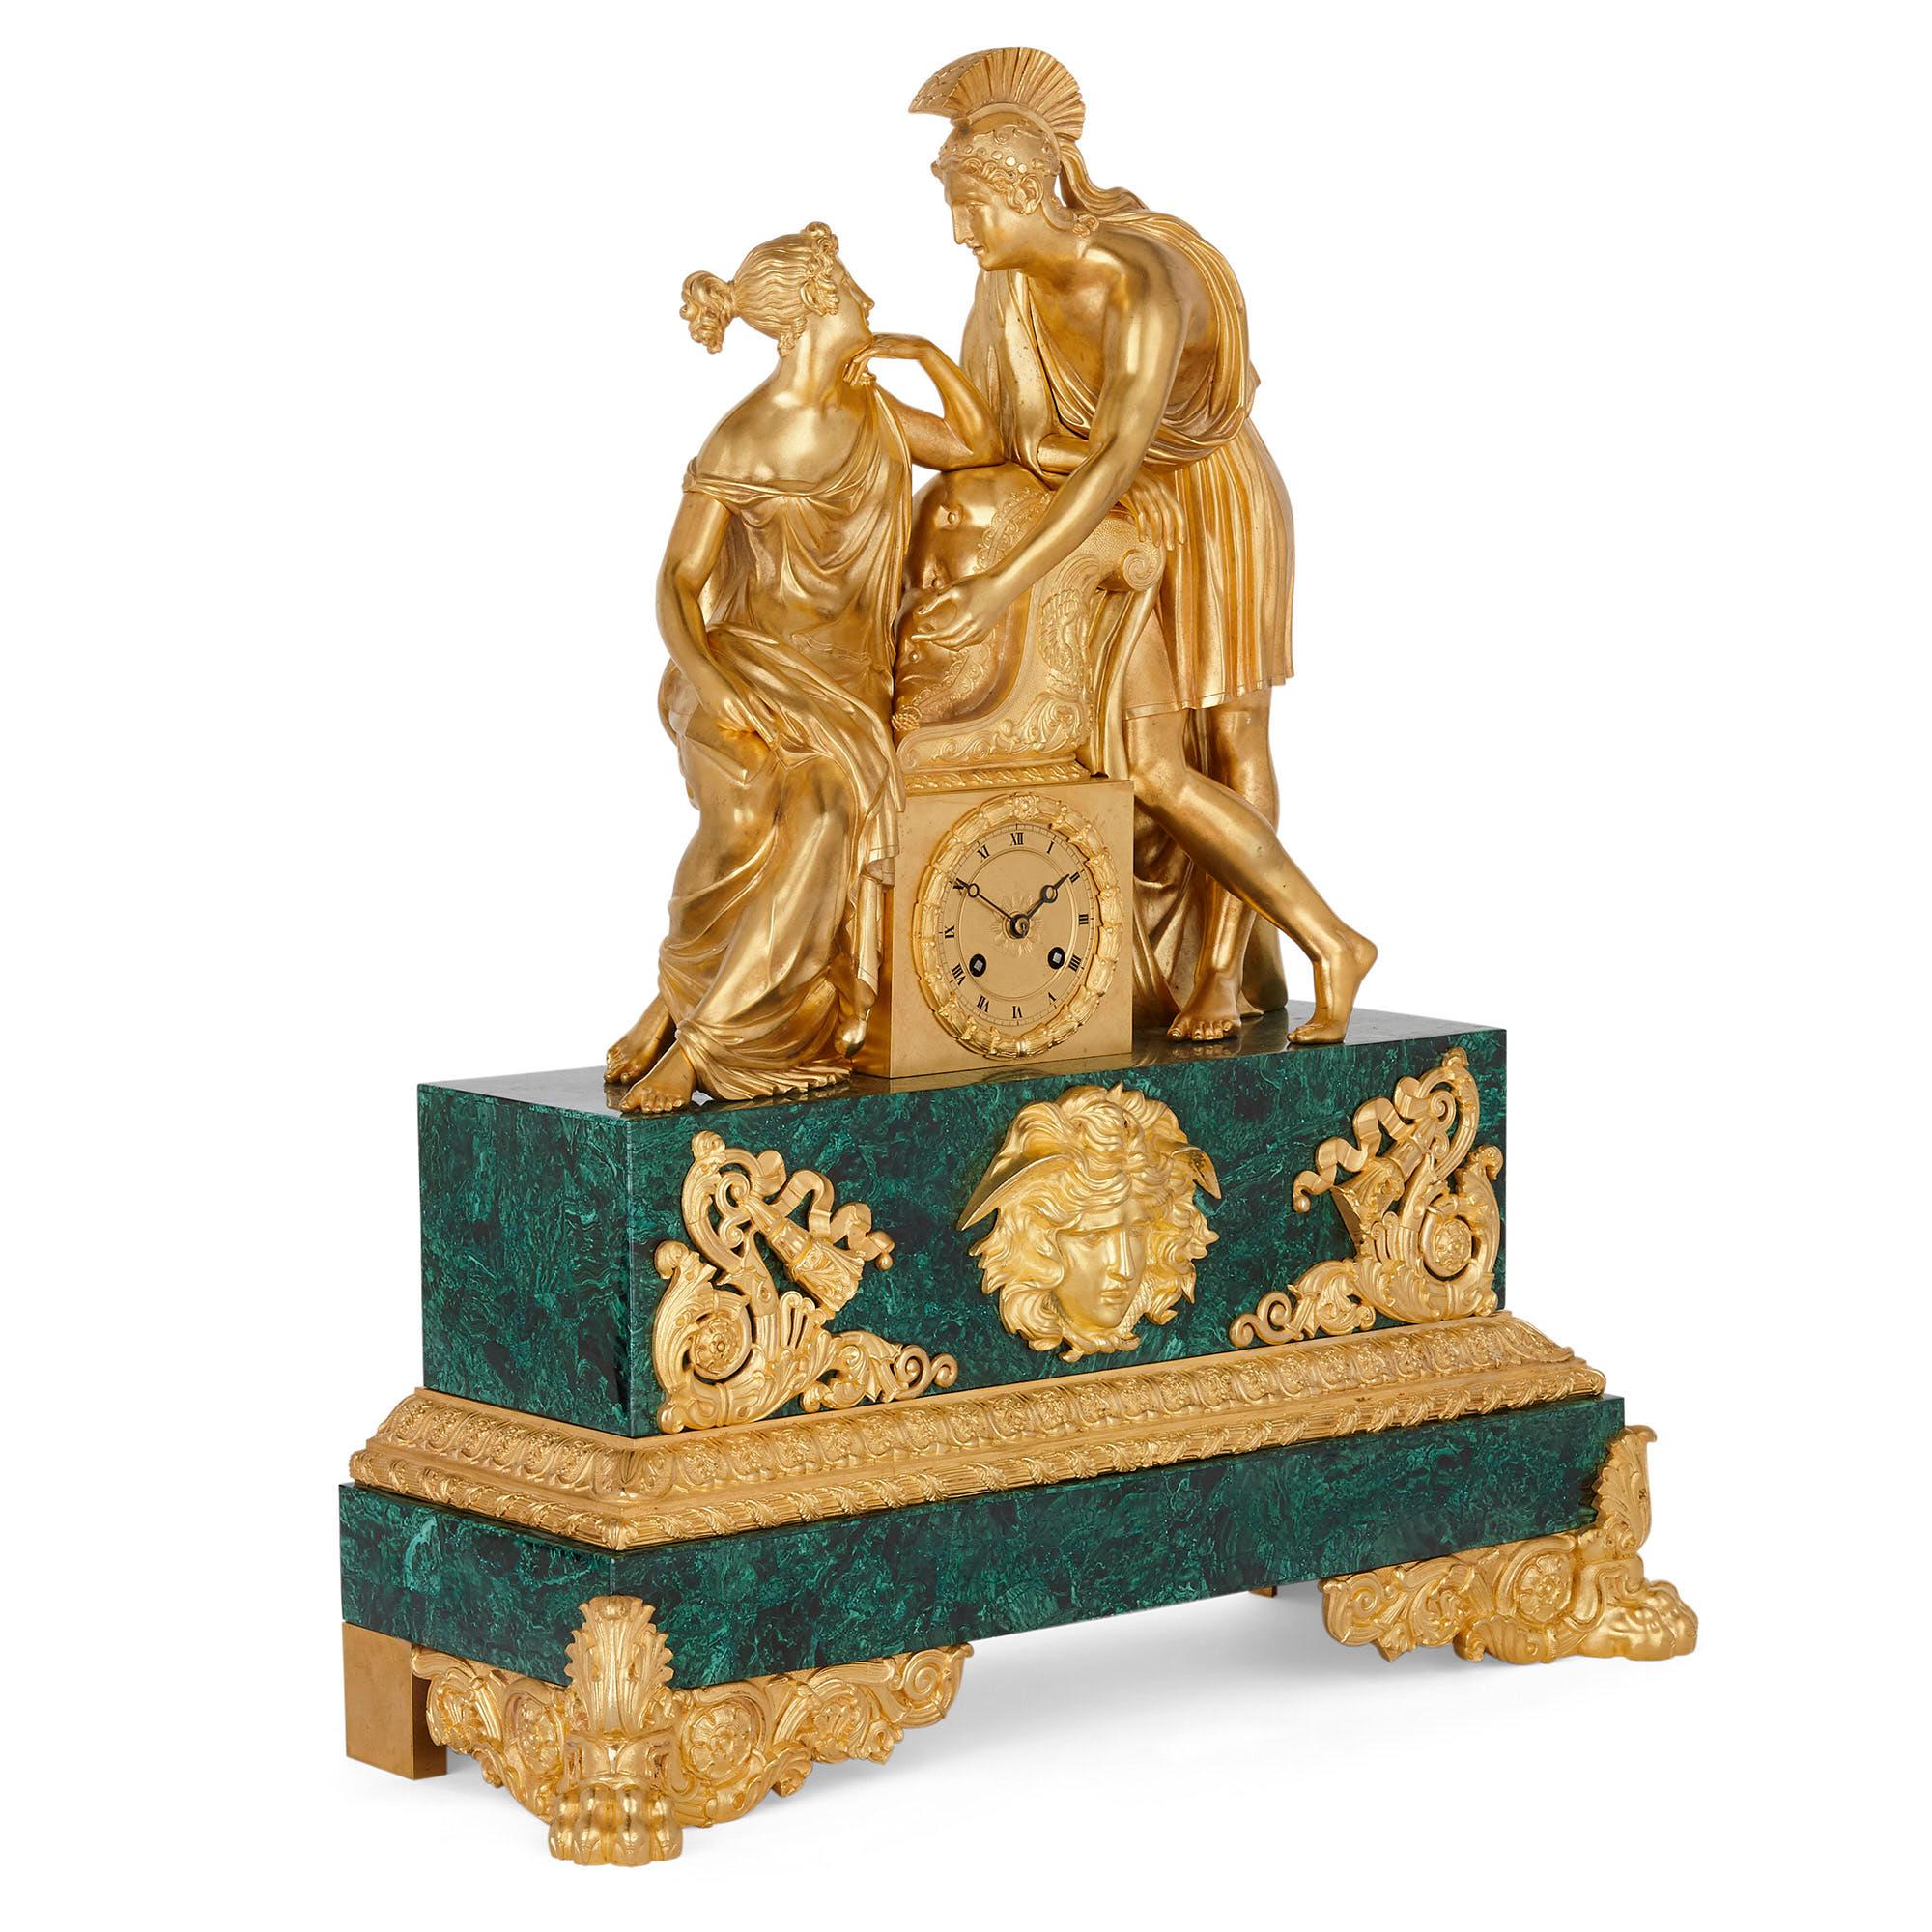 Large Charles X period gilt bronze and malachite clock
French, circa 1830
Measures: Height 62cm, width 54cm, depth 20cm

This fine mantel clock is a superb example of the Charles X style. The clock, wrought from malachite and gilt bronze,